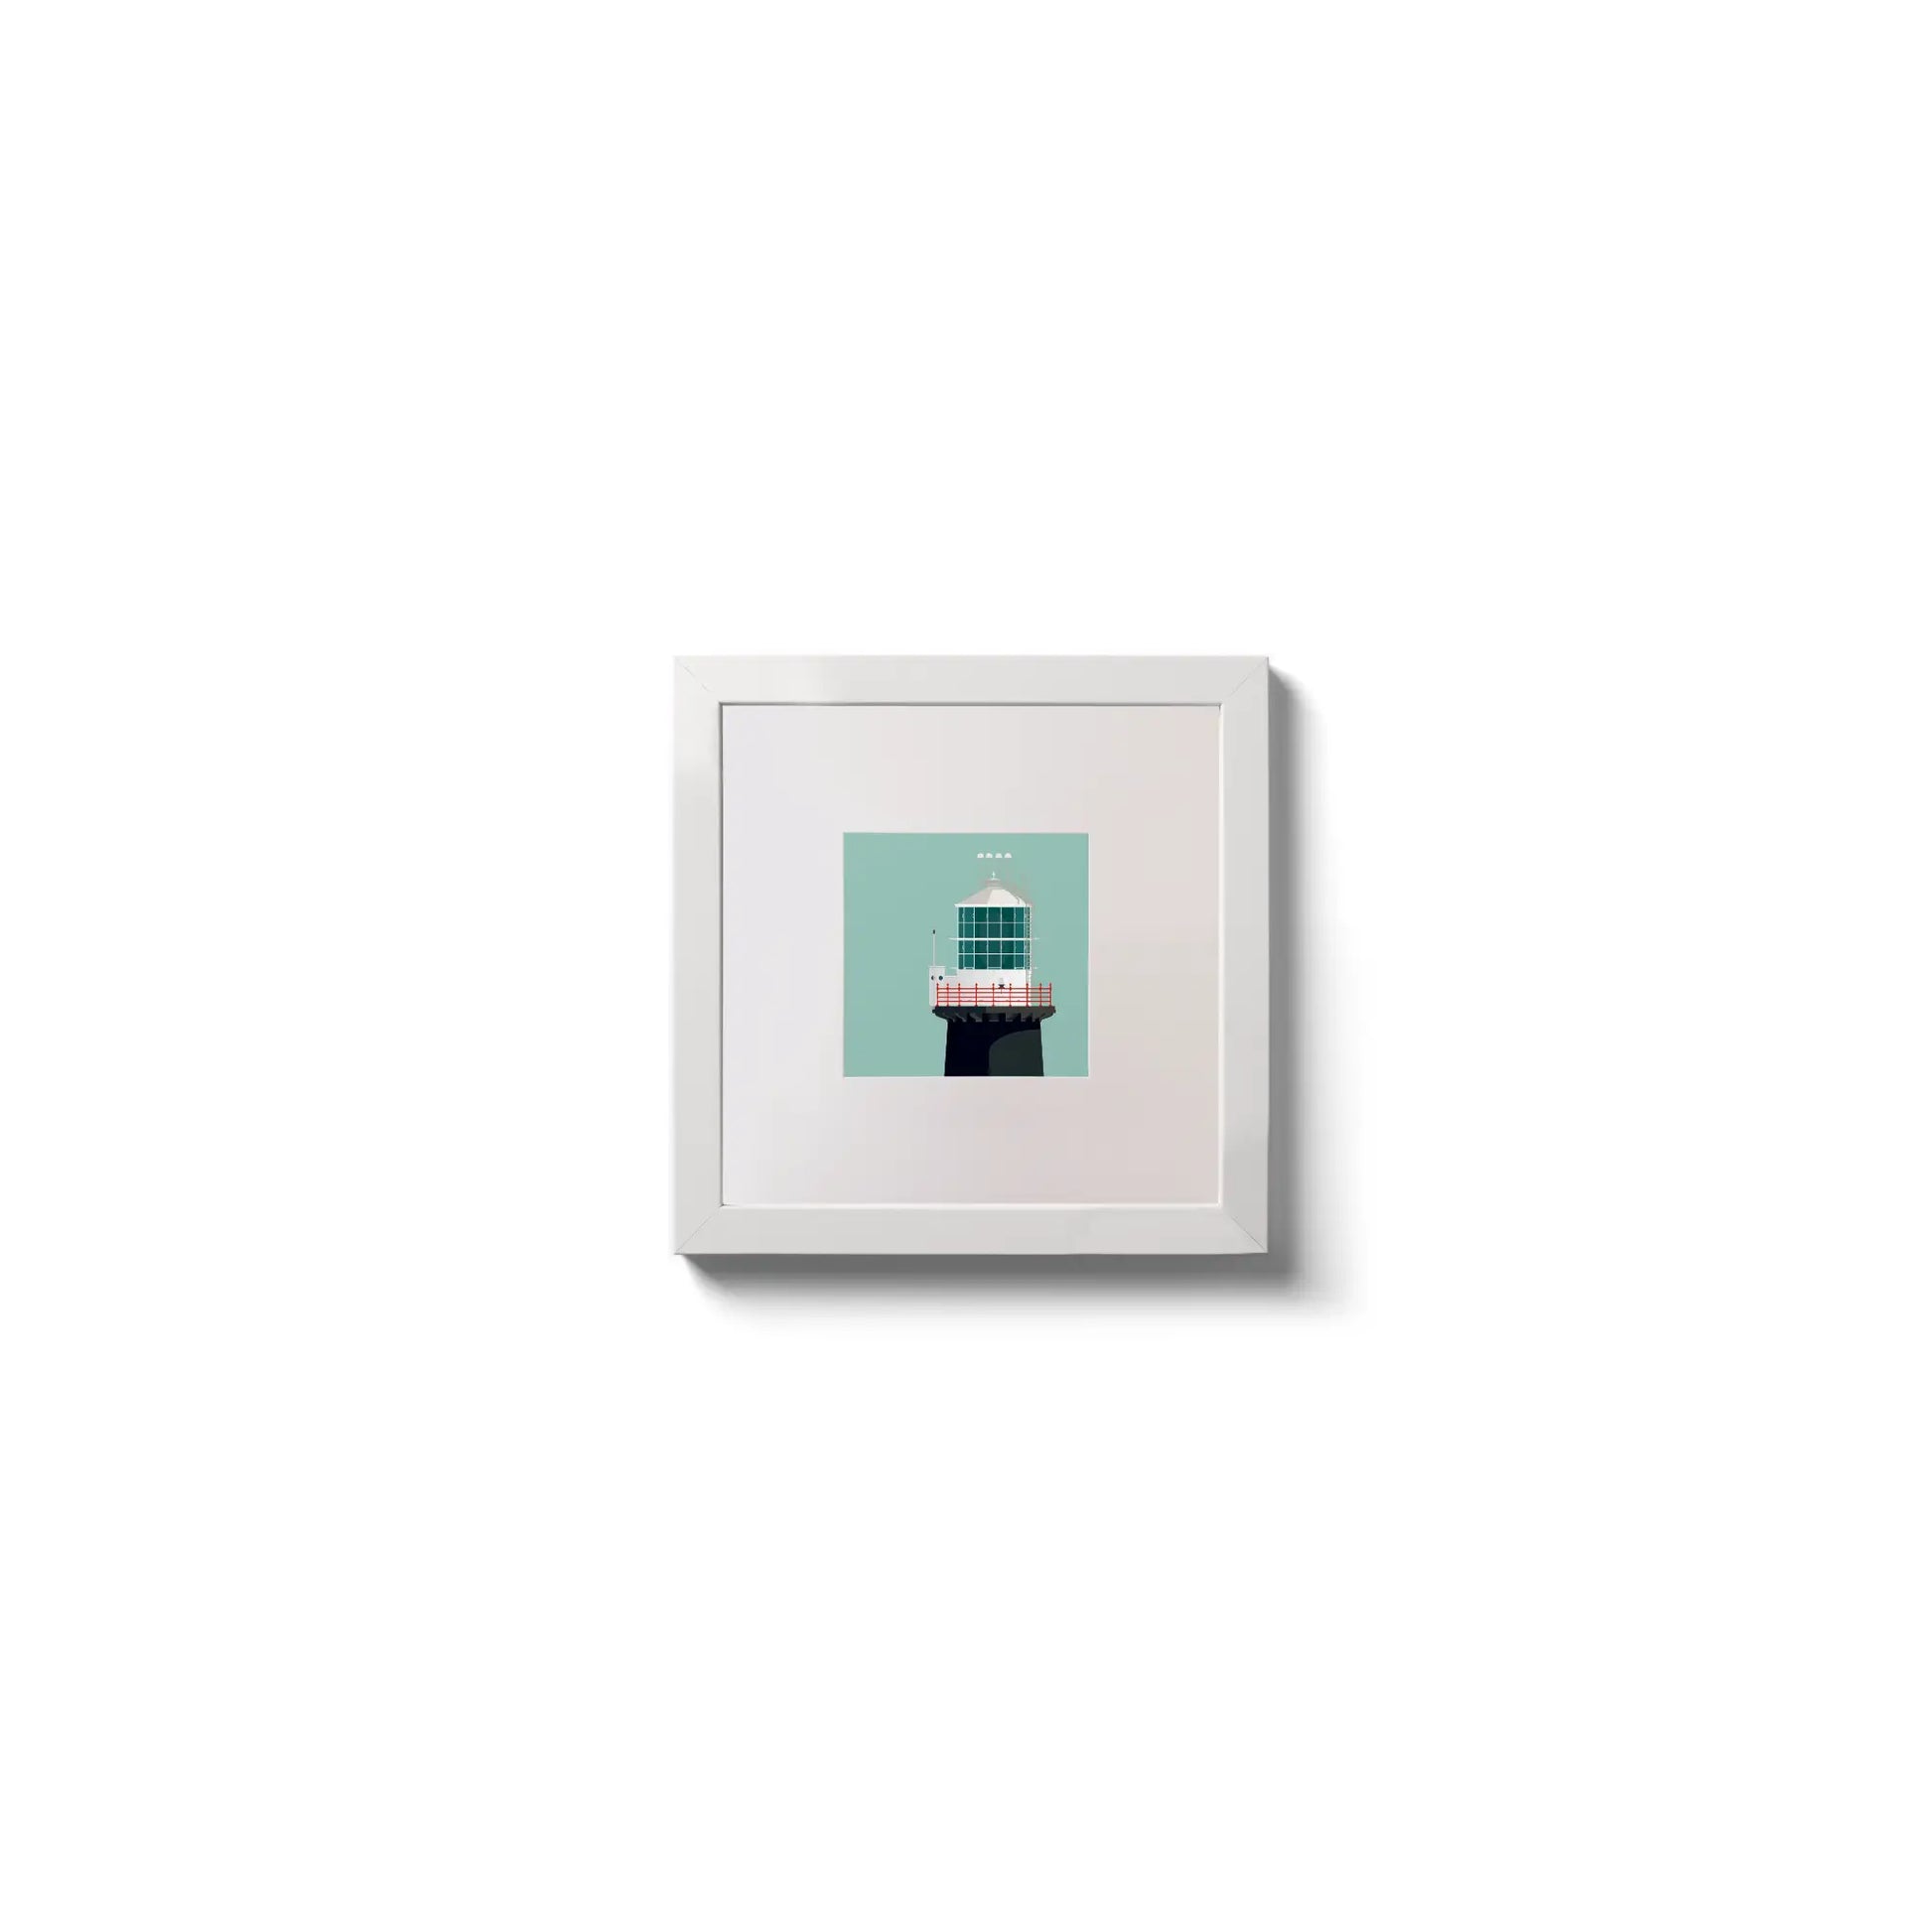 Illustration of Tory Island lighthouse on an ocean green background,  in a white square frame measuring 10x10cm.